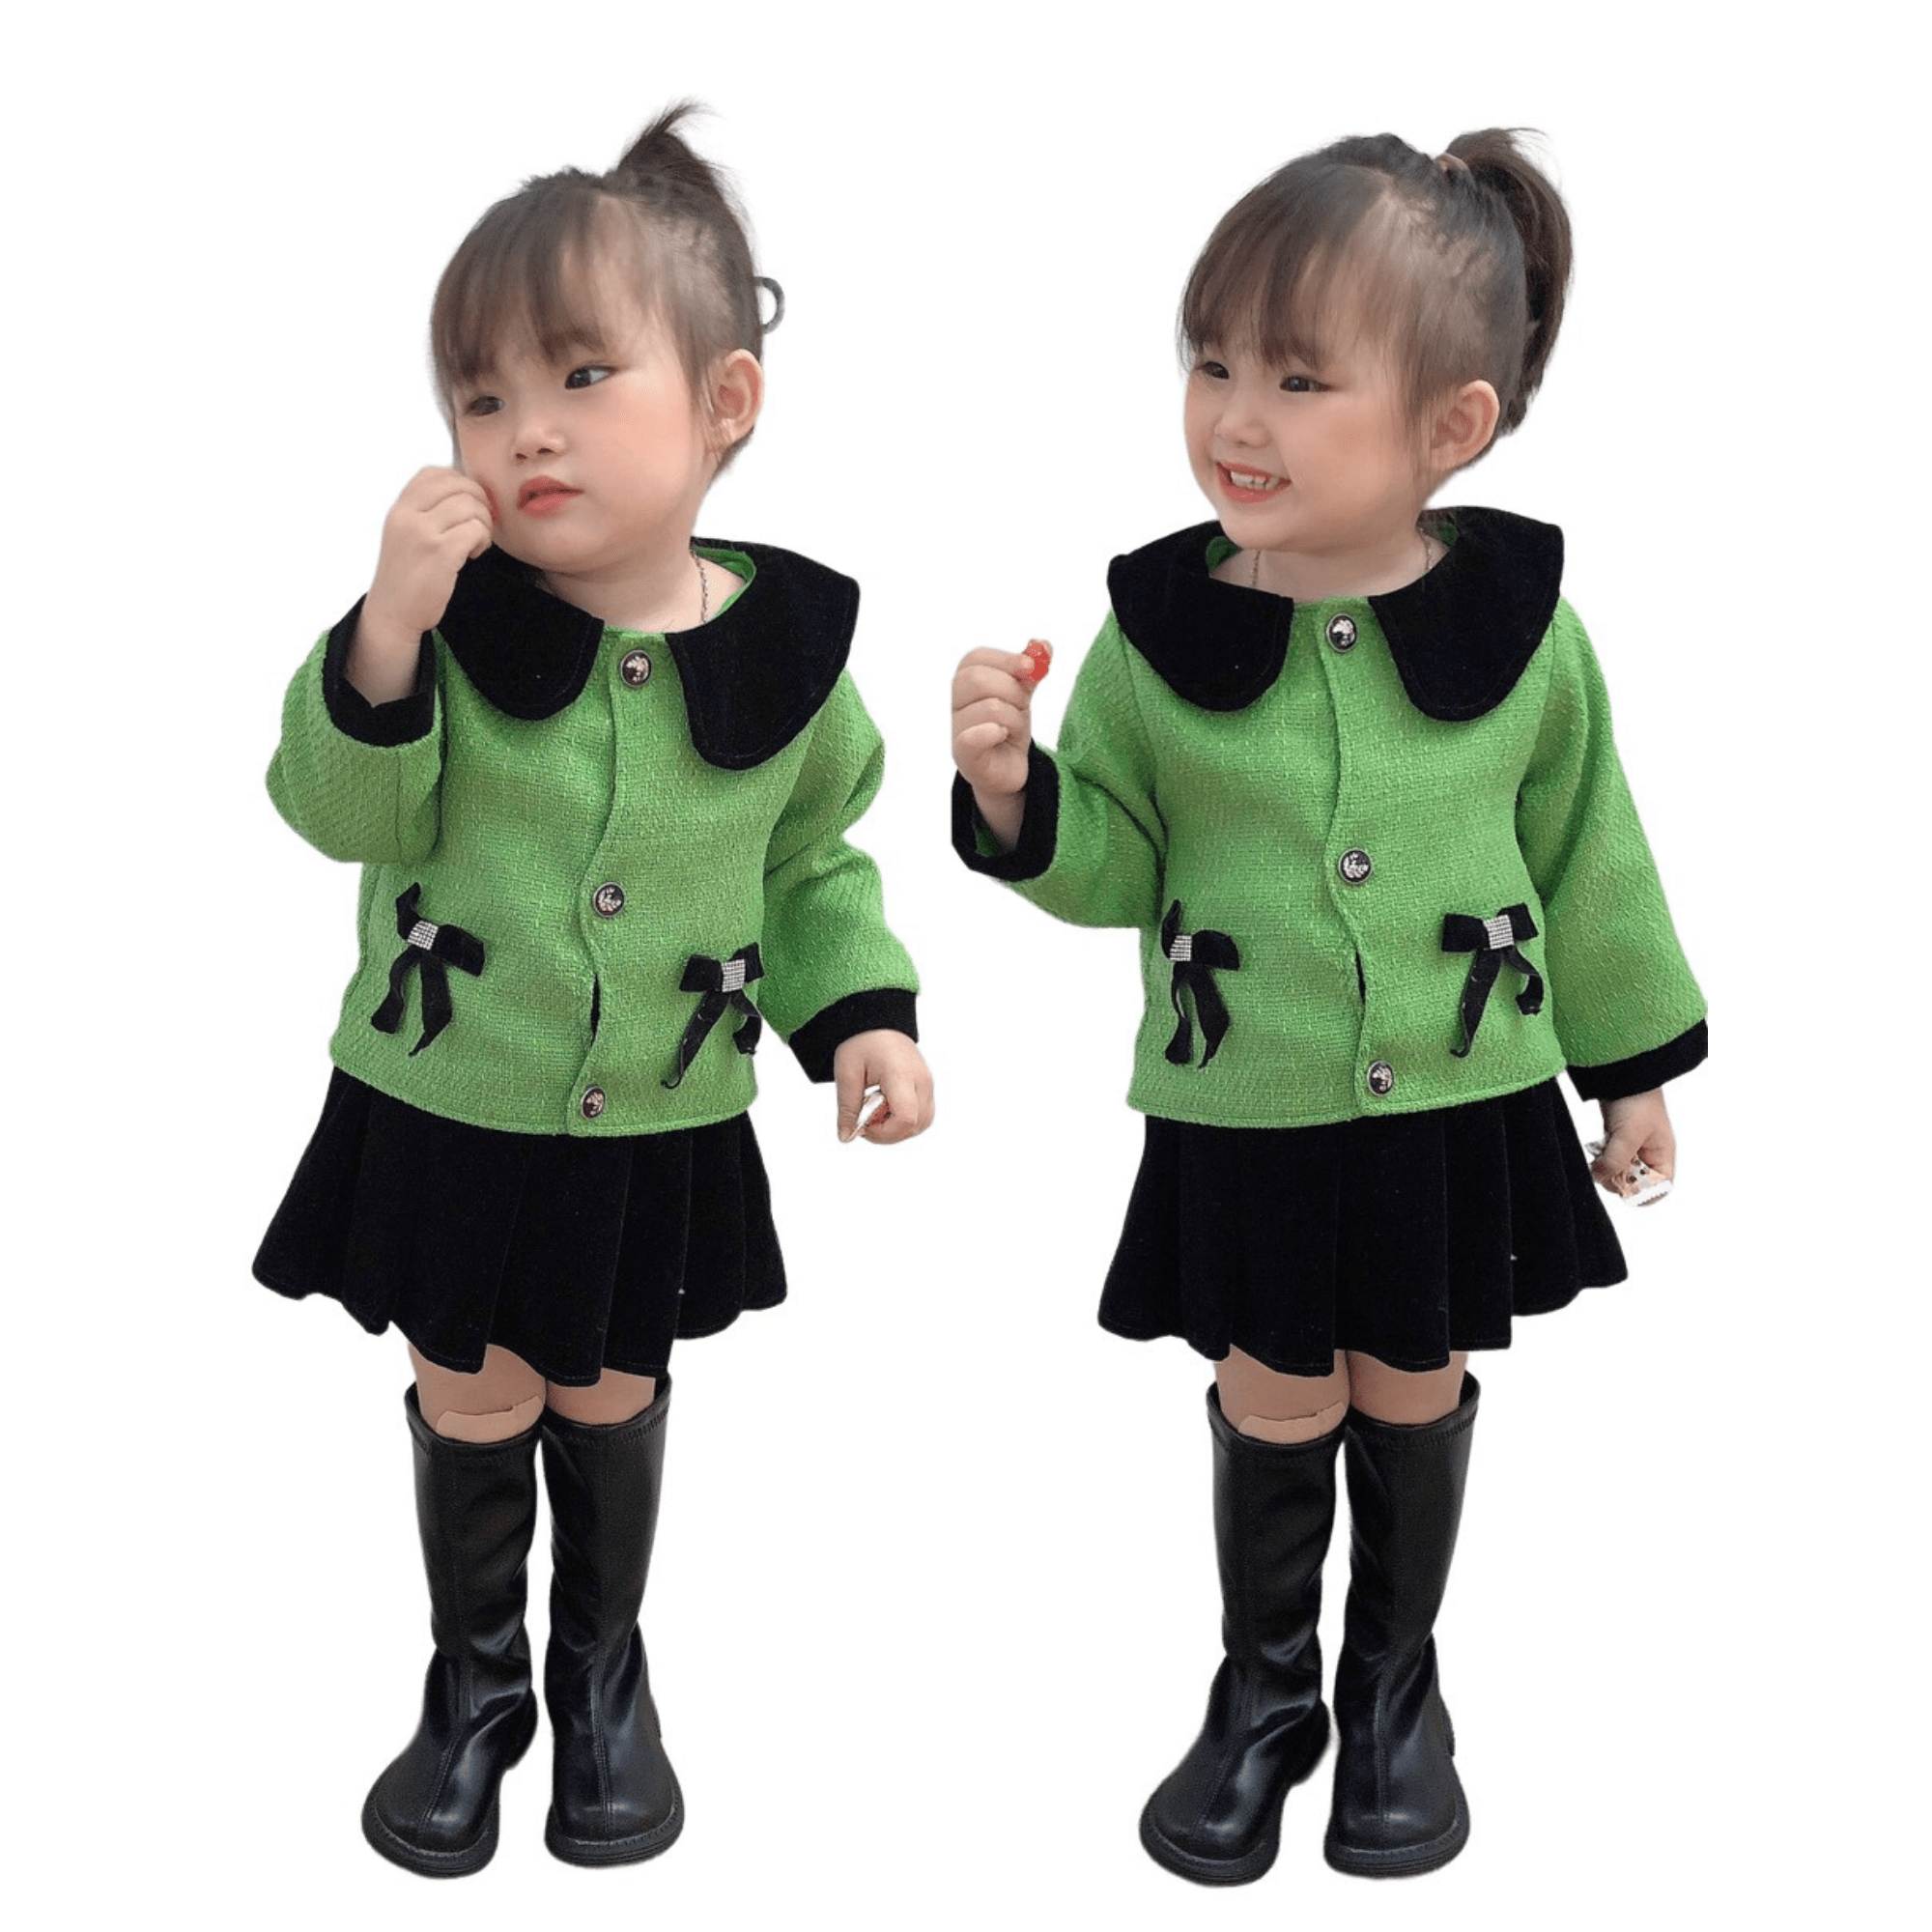 Wholesale Kids Clothes Customized Service Natural Dresses New Arrival Each One In Opp Bag From Vietnam Manufacturer 4